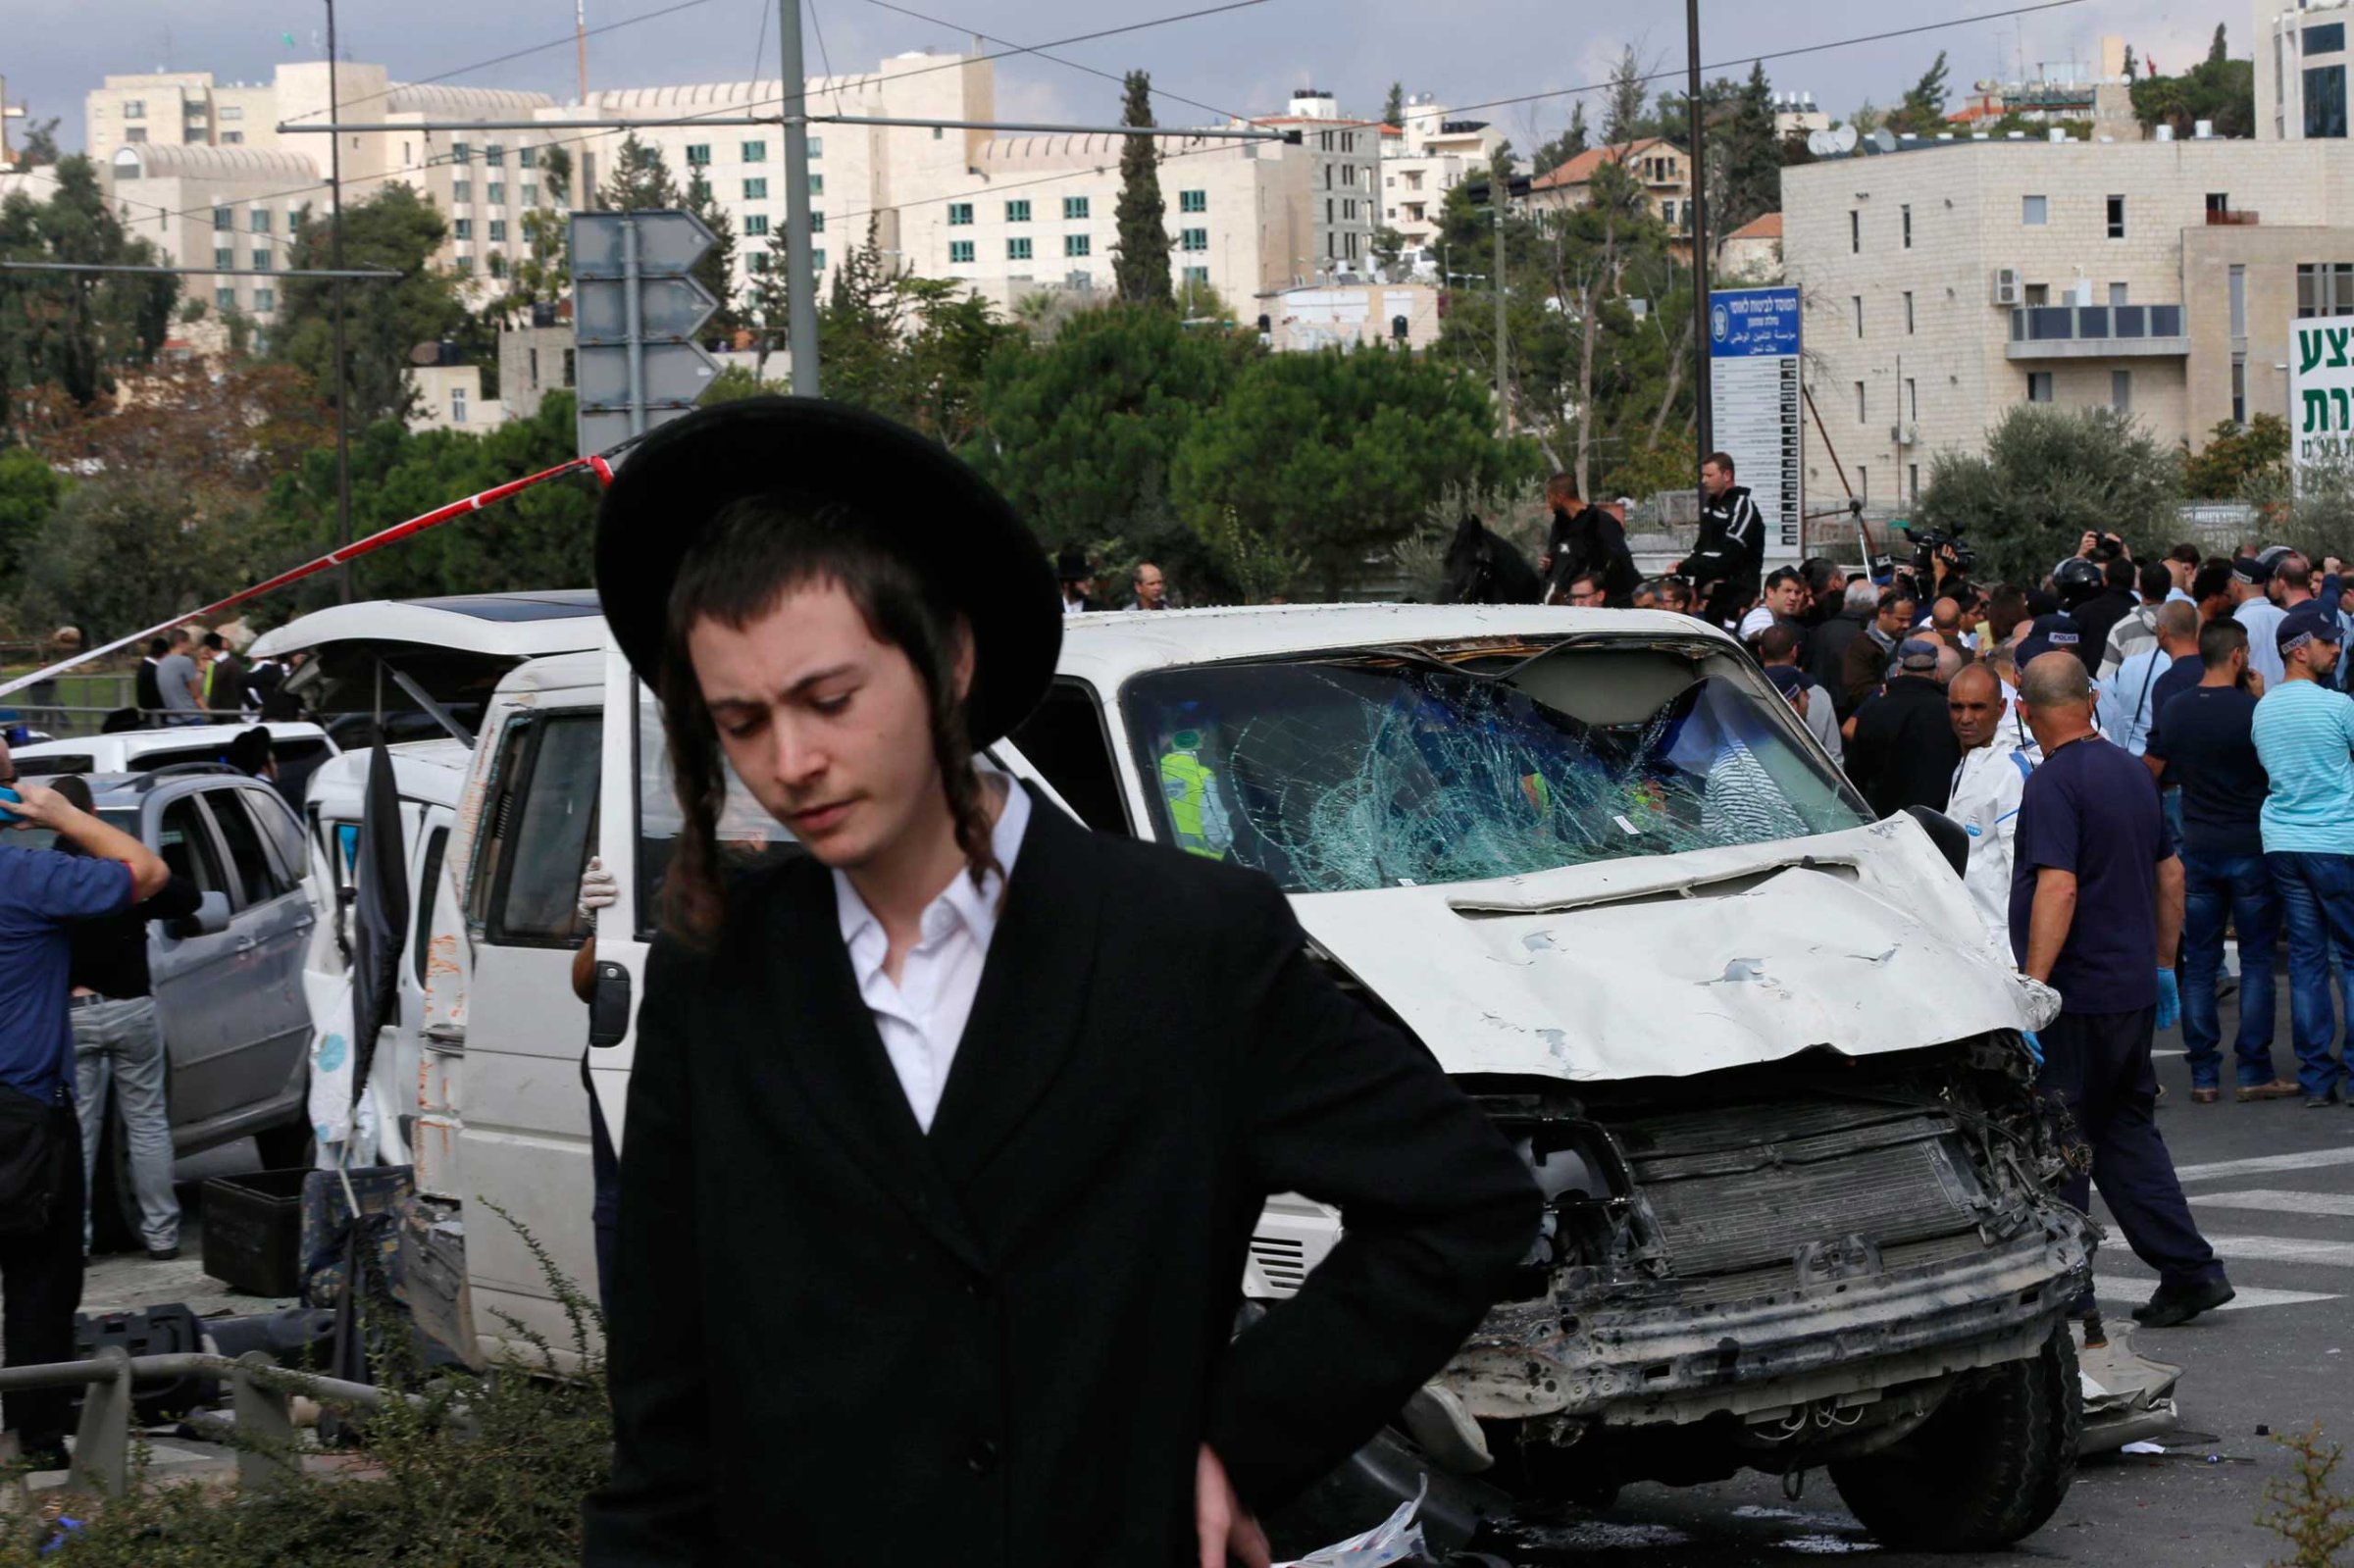 An ultra-Orthodox youth stands in front of the vehicle of a Palestinian motorist who rammed into pedestrians at the scene of an attack in Jerusalem, Nov. 5, 2014.